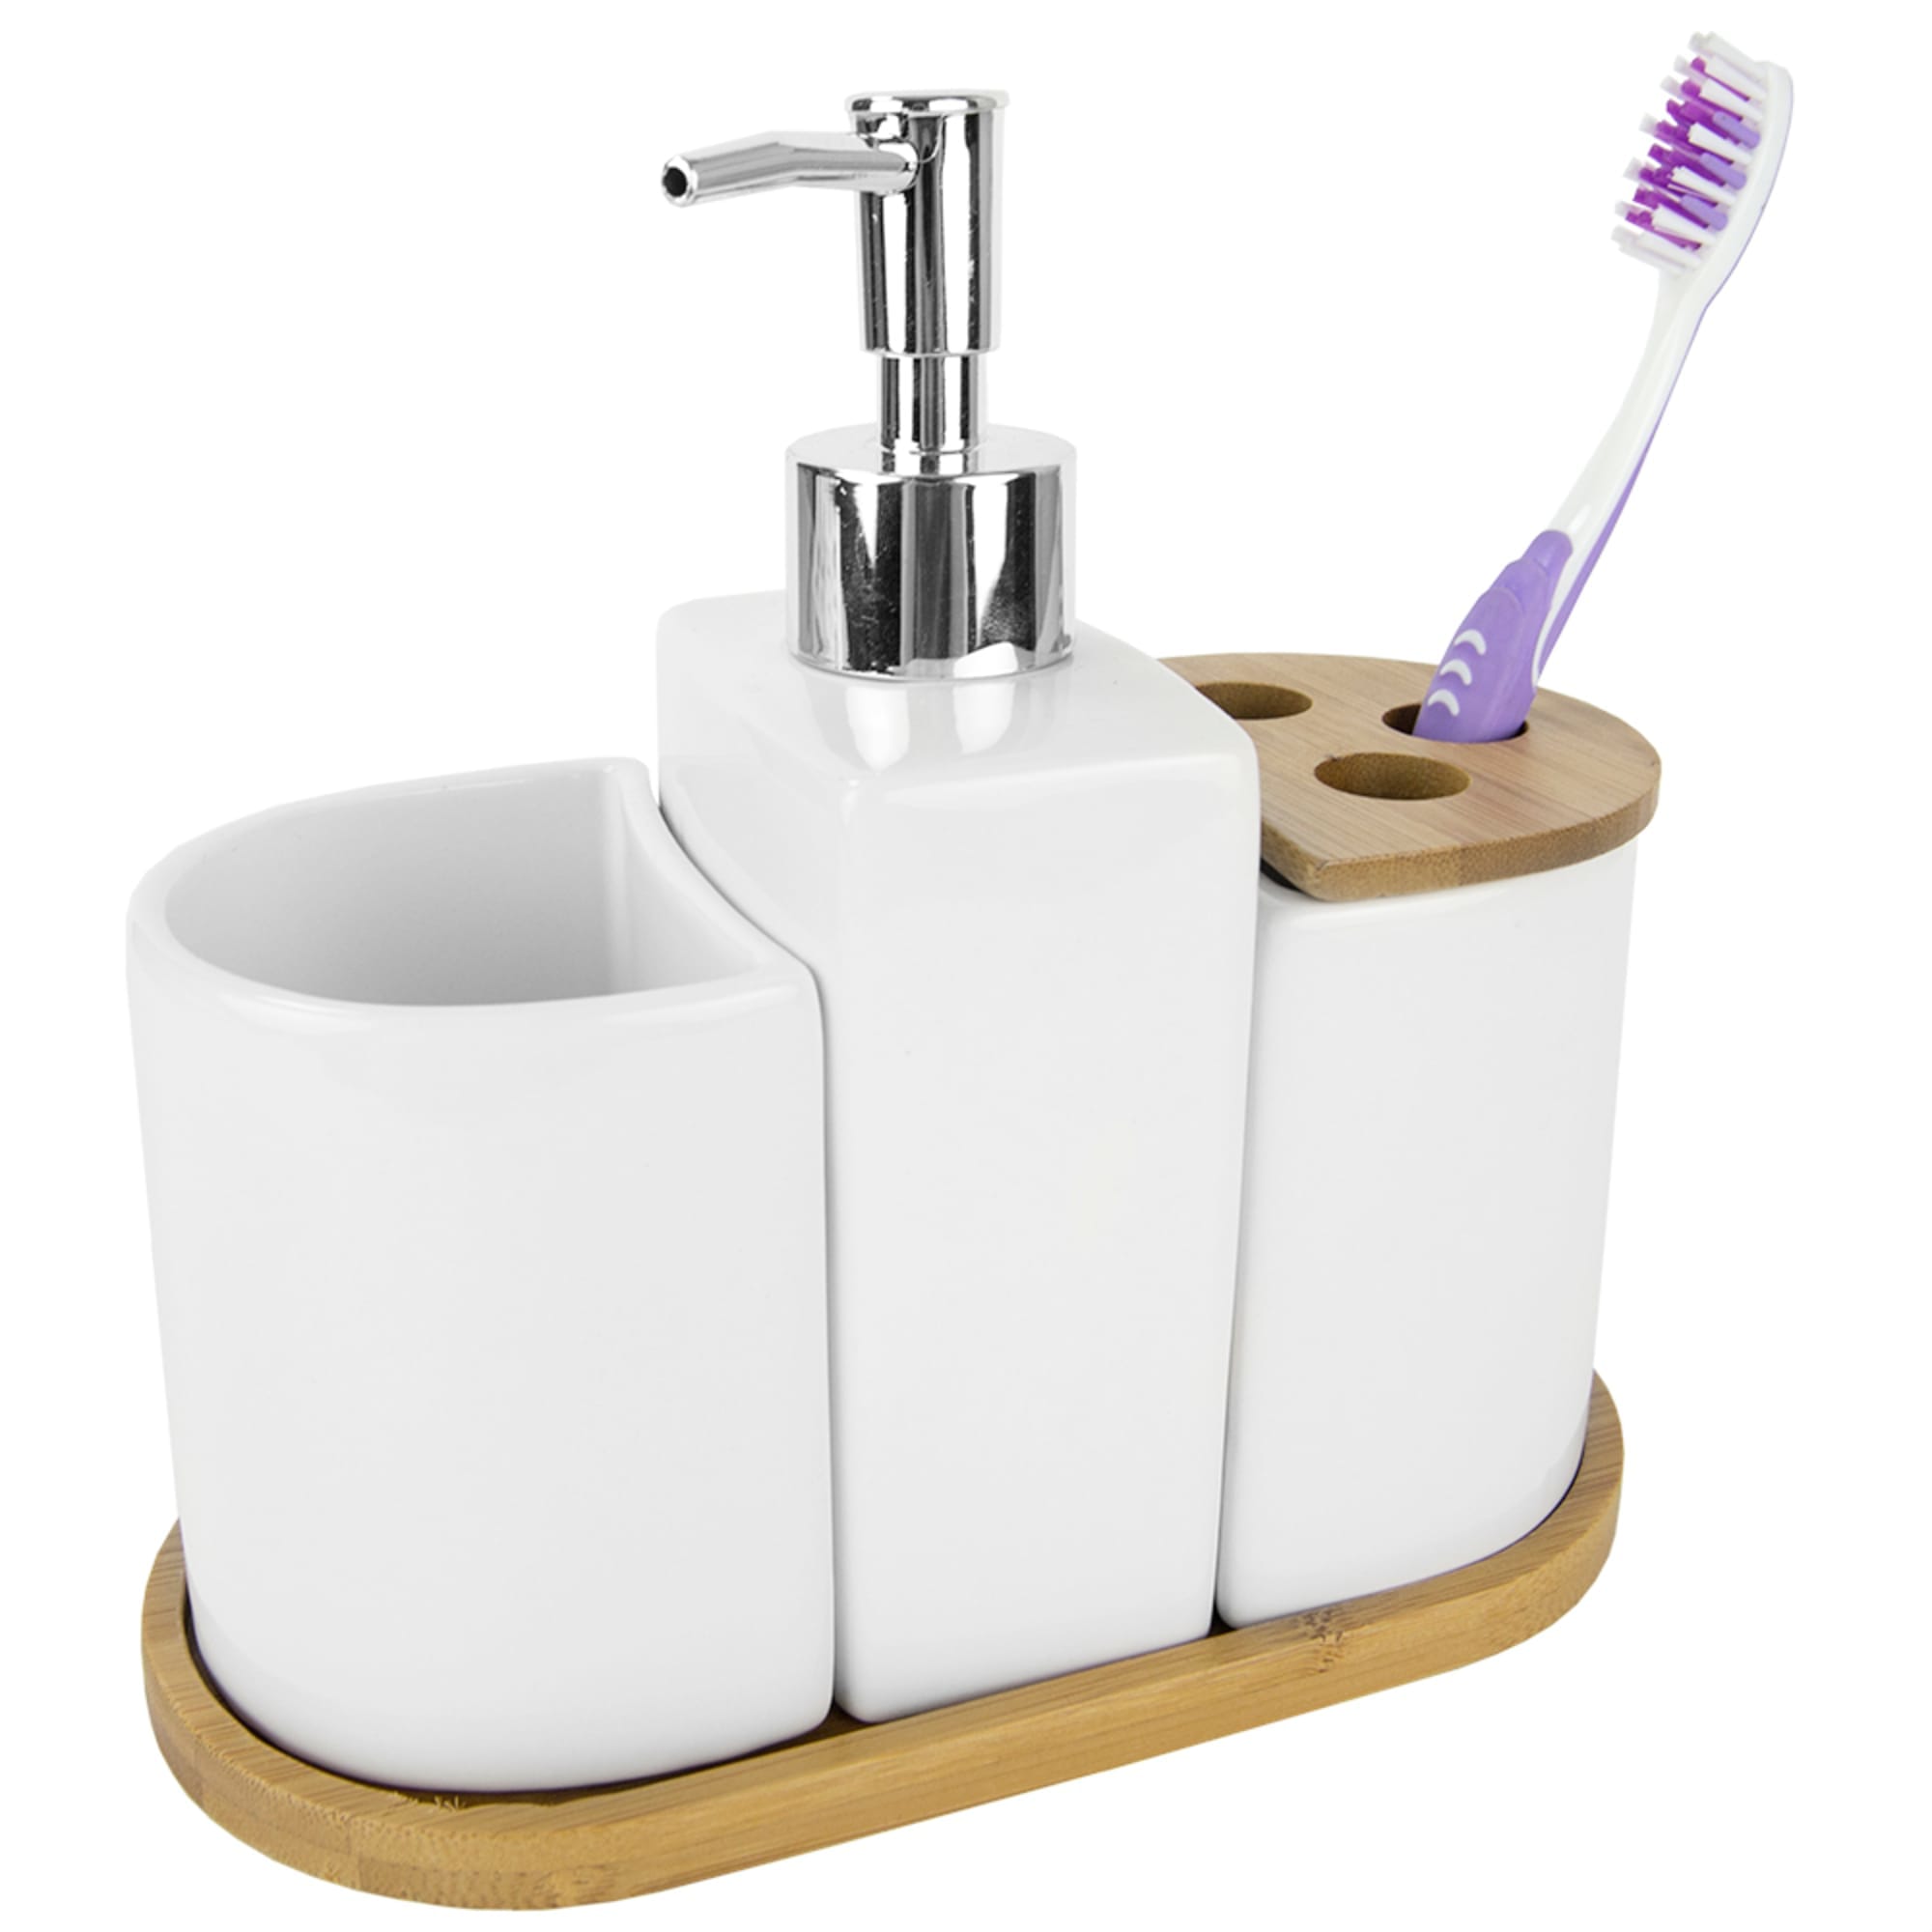 Home Basics 4 Piece Ceramic Bath Accessory Set with Bamboo Accents $10.00 EACH, CASE PACK OF 6